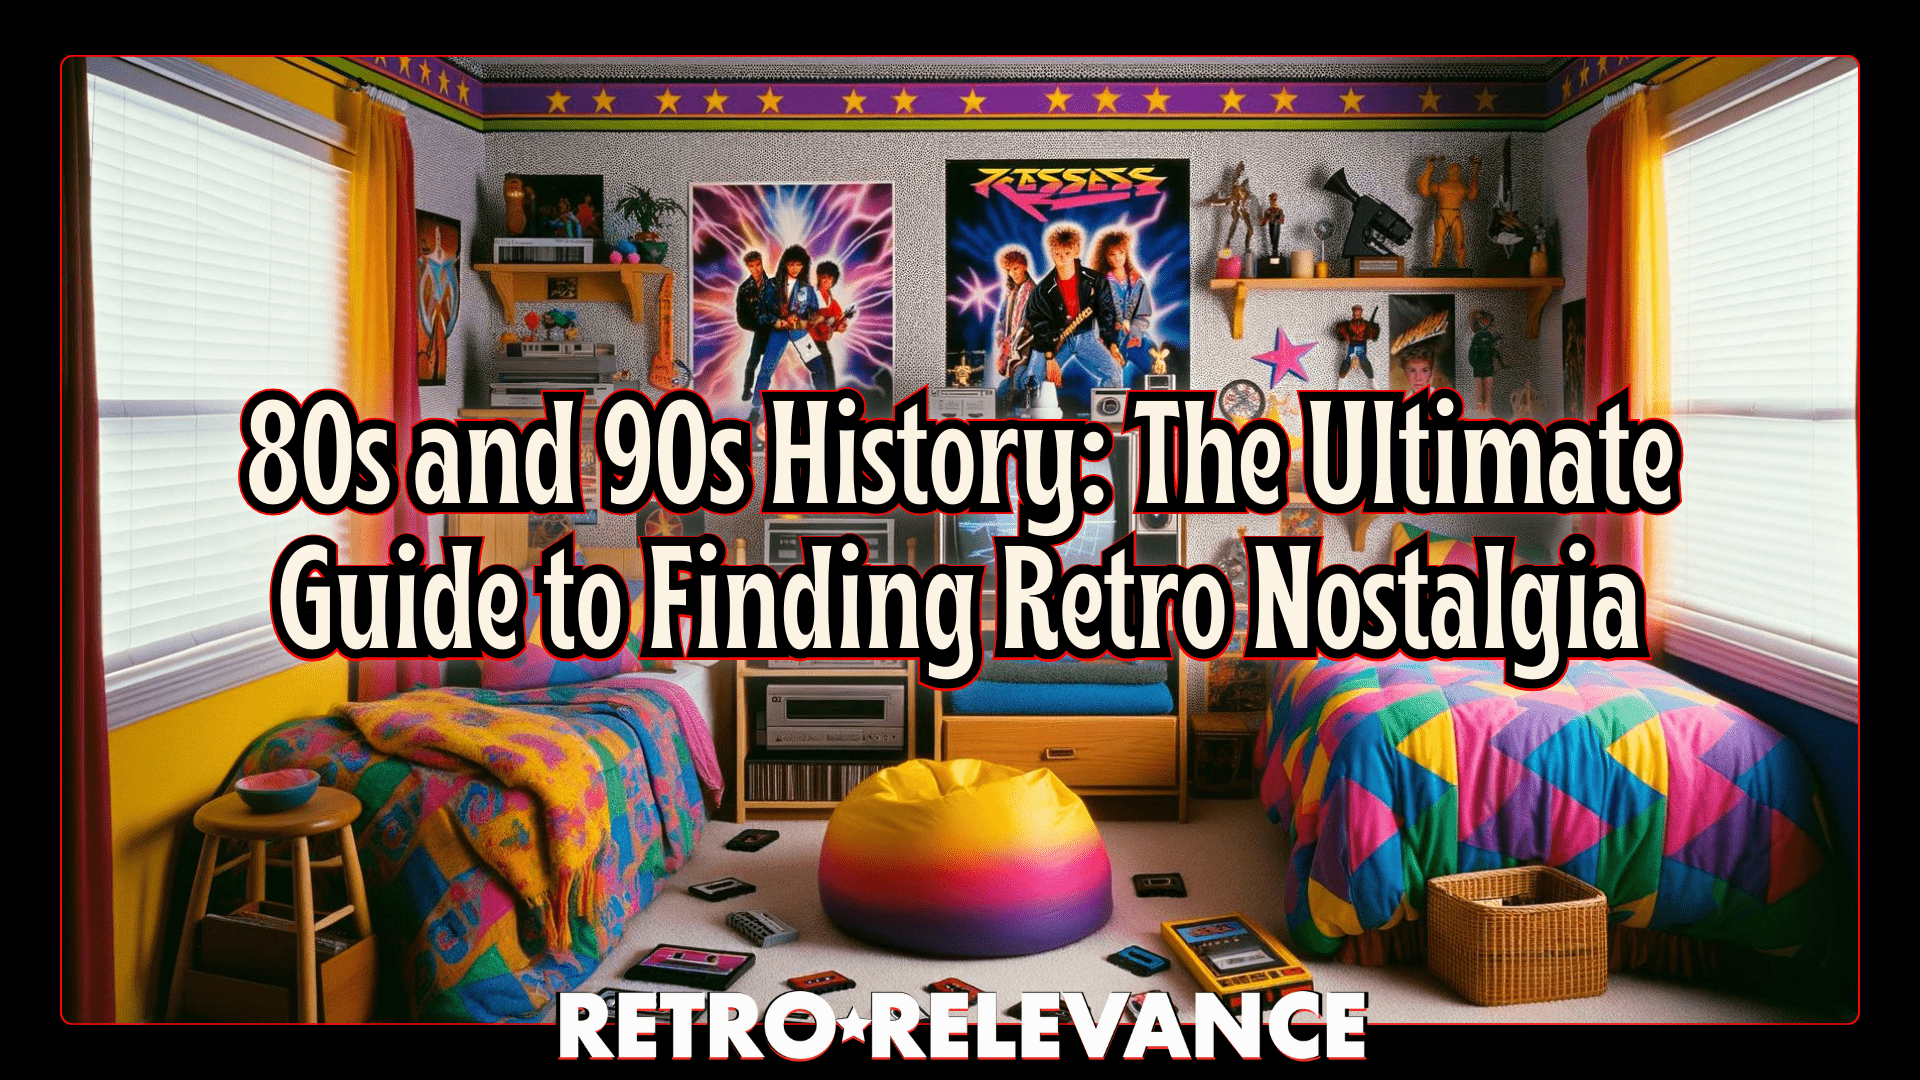 80s and 90s History: The Ultimate Guide to Finding Retro Nostalgia